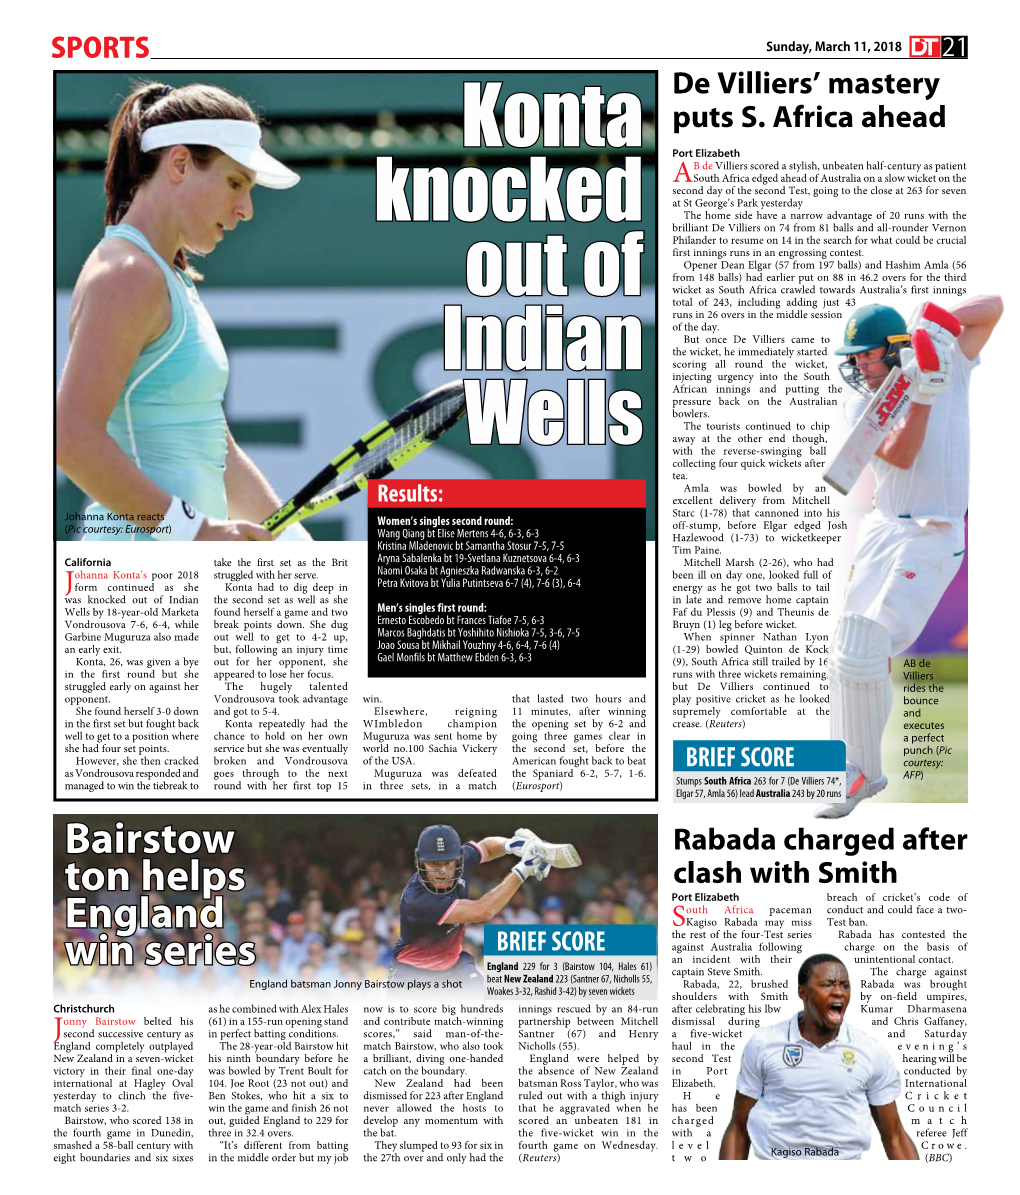 Konta Knocked out of Indian Wells